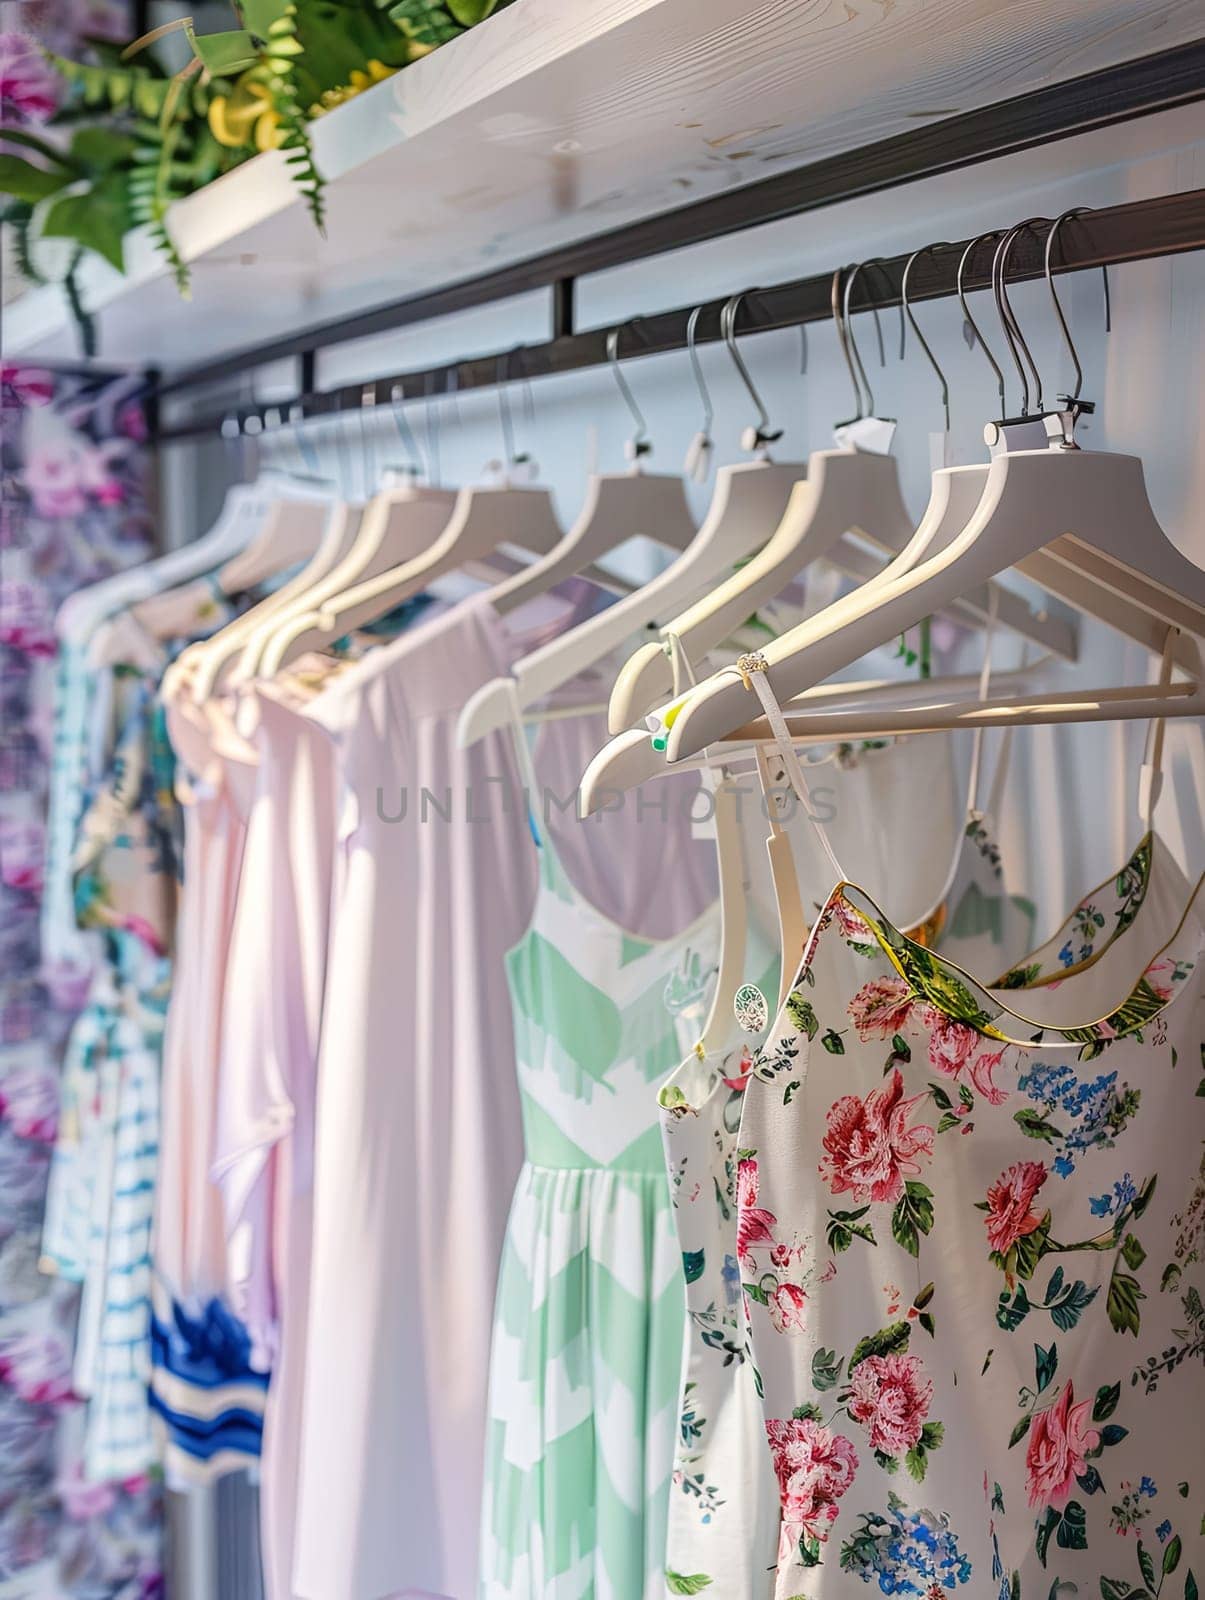 Various stylish dresses and shirts neatly arranged and hanging on a rack in a fashionable womens closet. Creative concept of a clothing showroom.